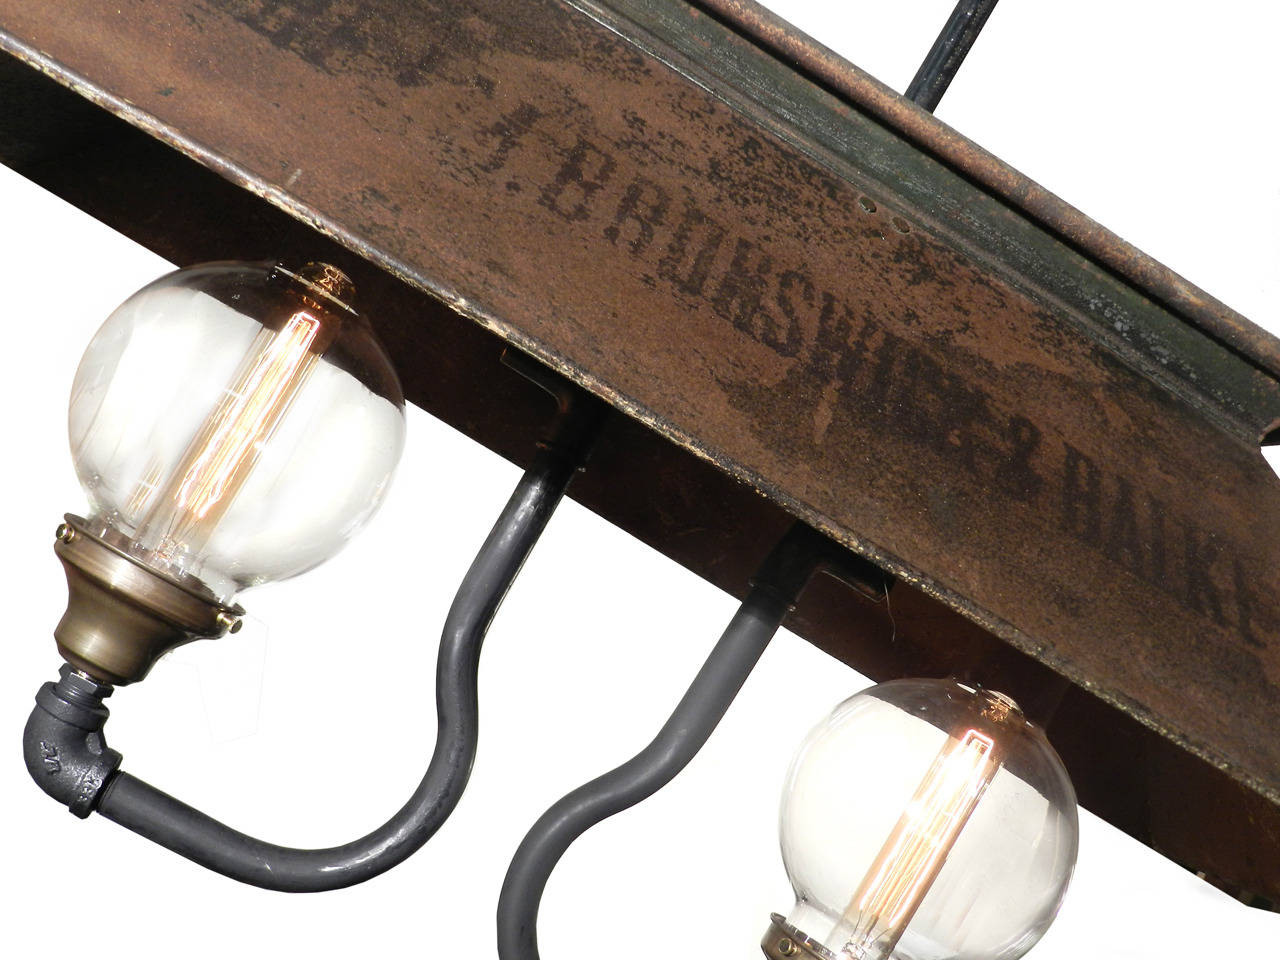 The tin shade on this lamp is a real survivor. It still has the original lettering advertising the maker J. M. Brunswick And Blake Co. This dates it to the early 1880s. It's been electrified for everyday use but originally used kerosene to fuel it.